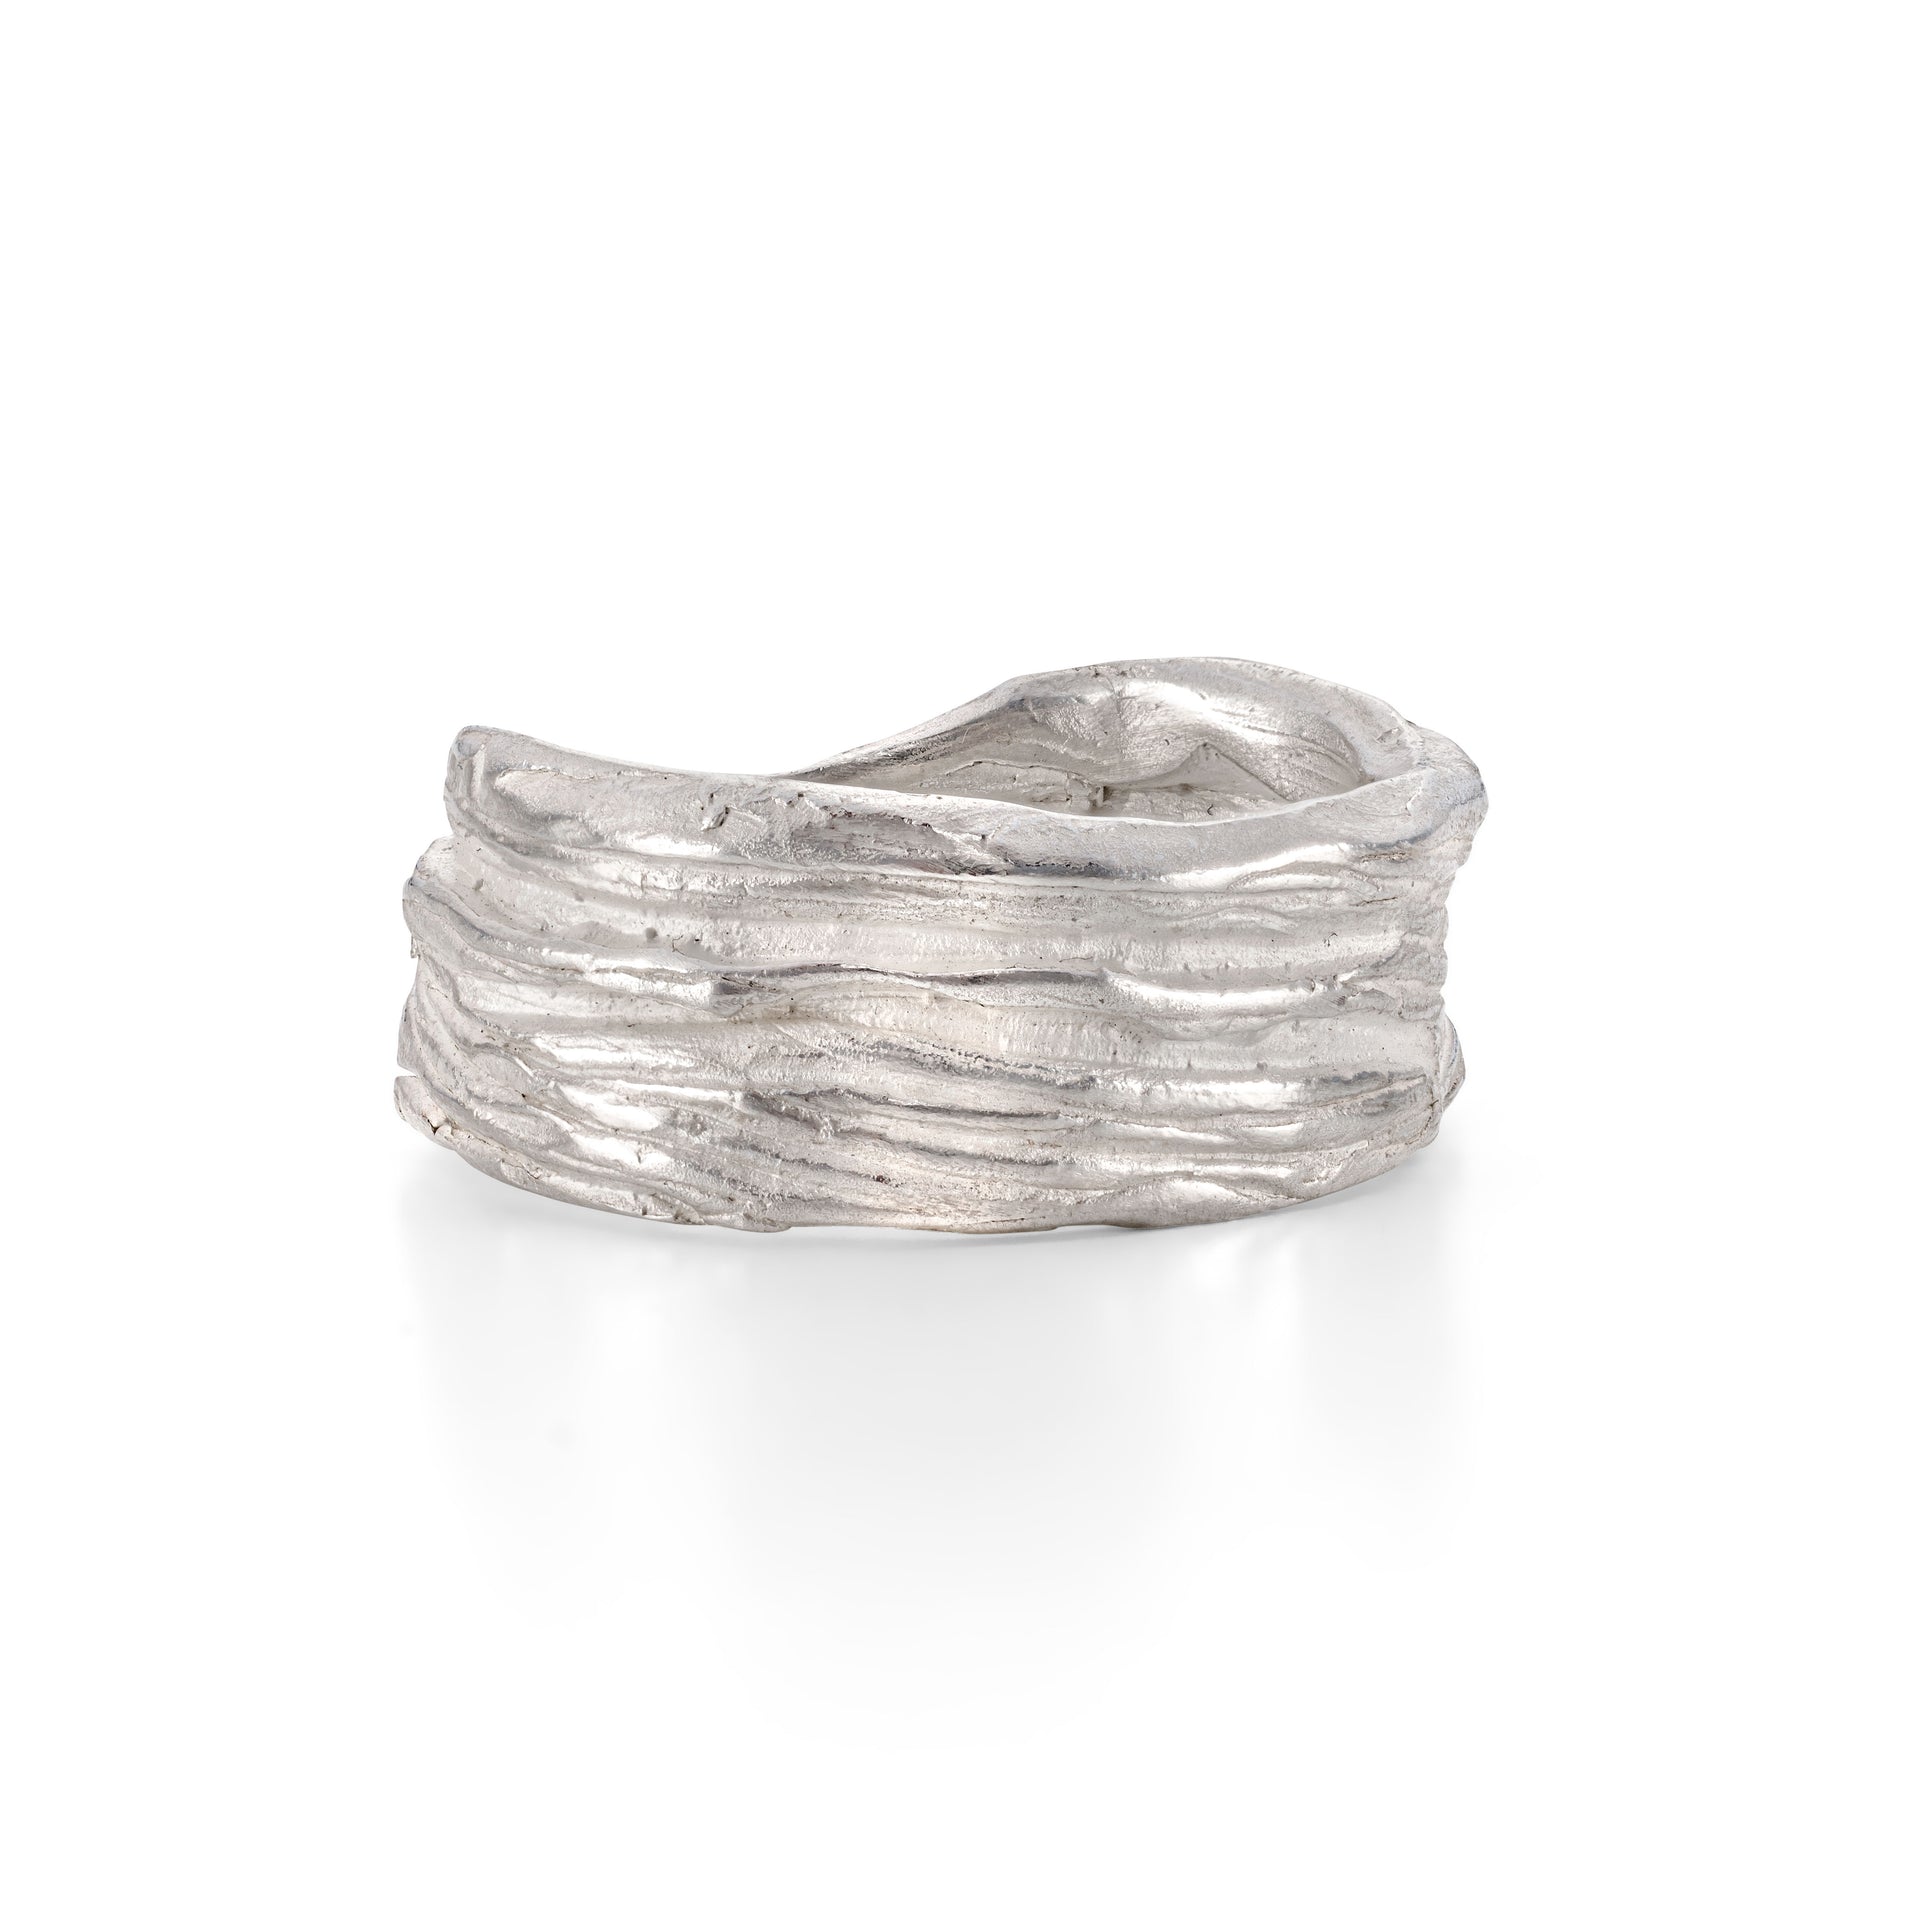 Textured wide silver ring by Emily Nixon. Designed for Men. Made from 100% recycled silver.